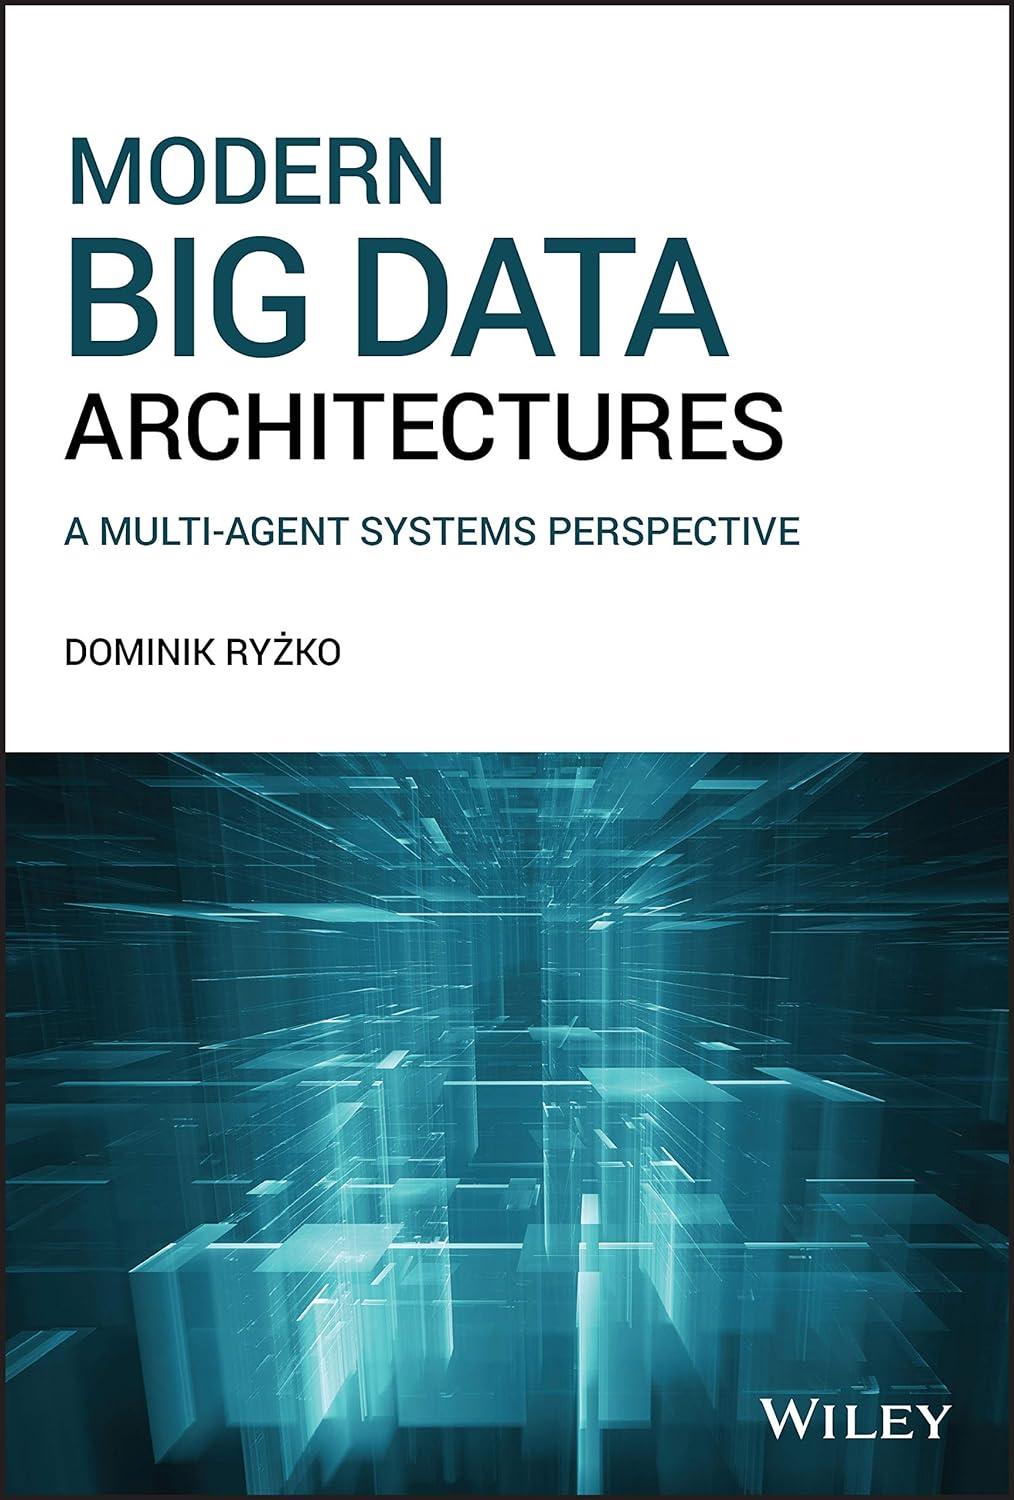 Modern Big Data Architectures A Multi-Agent Systems Perspective